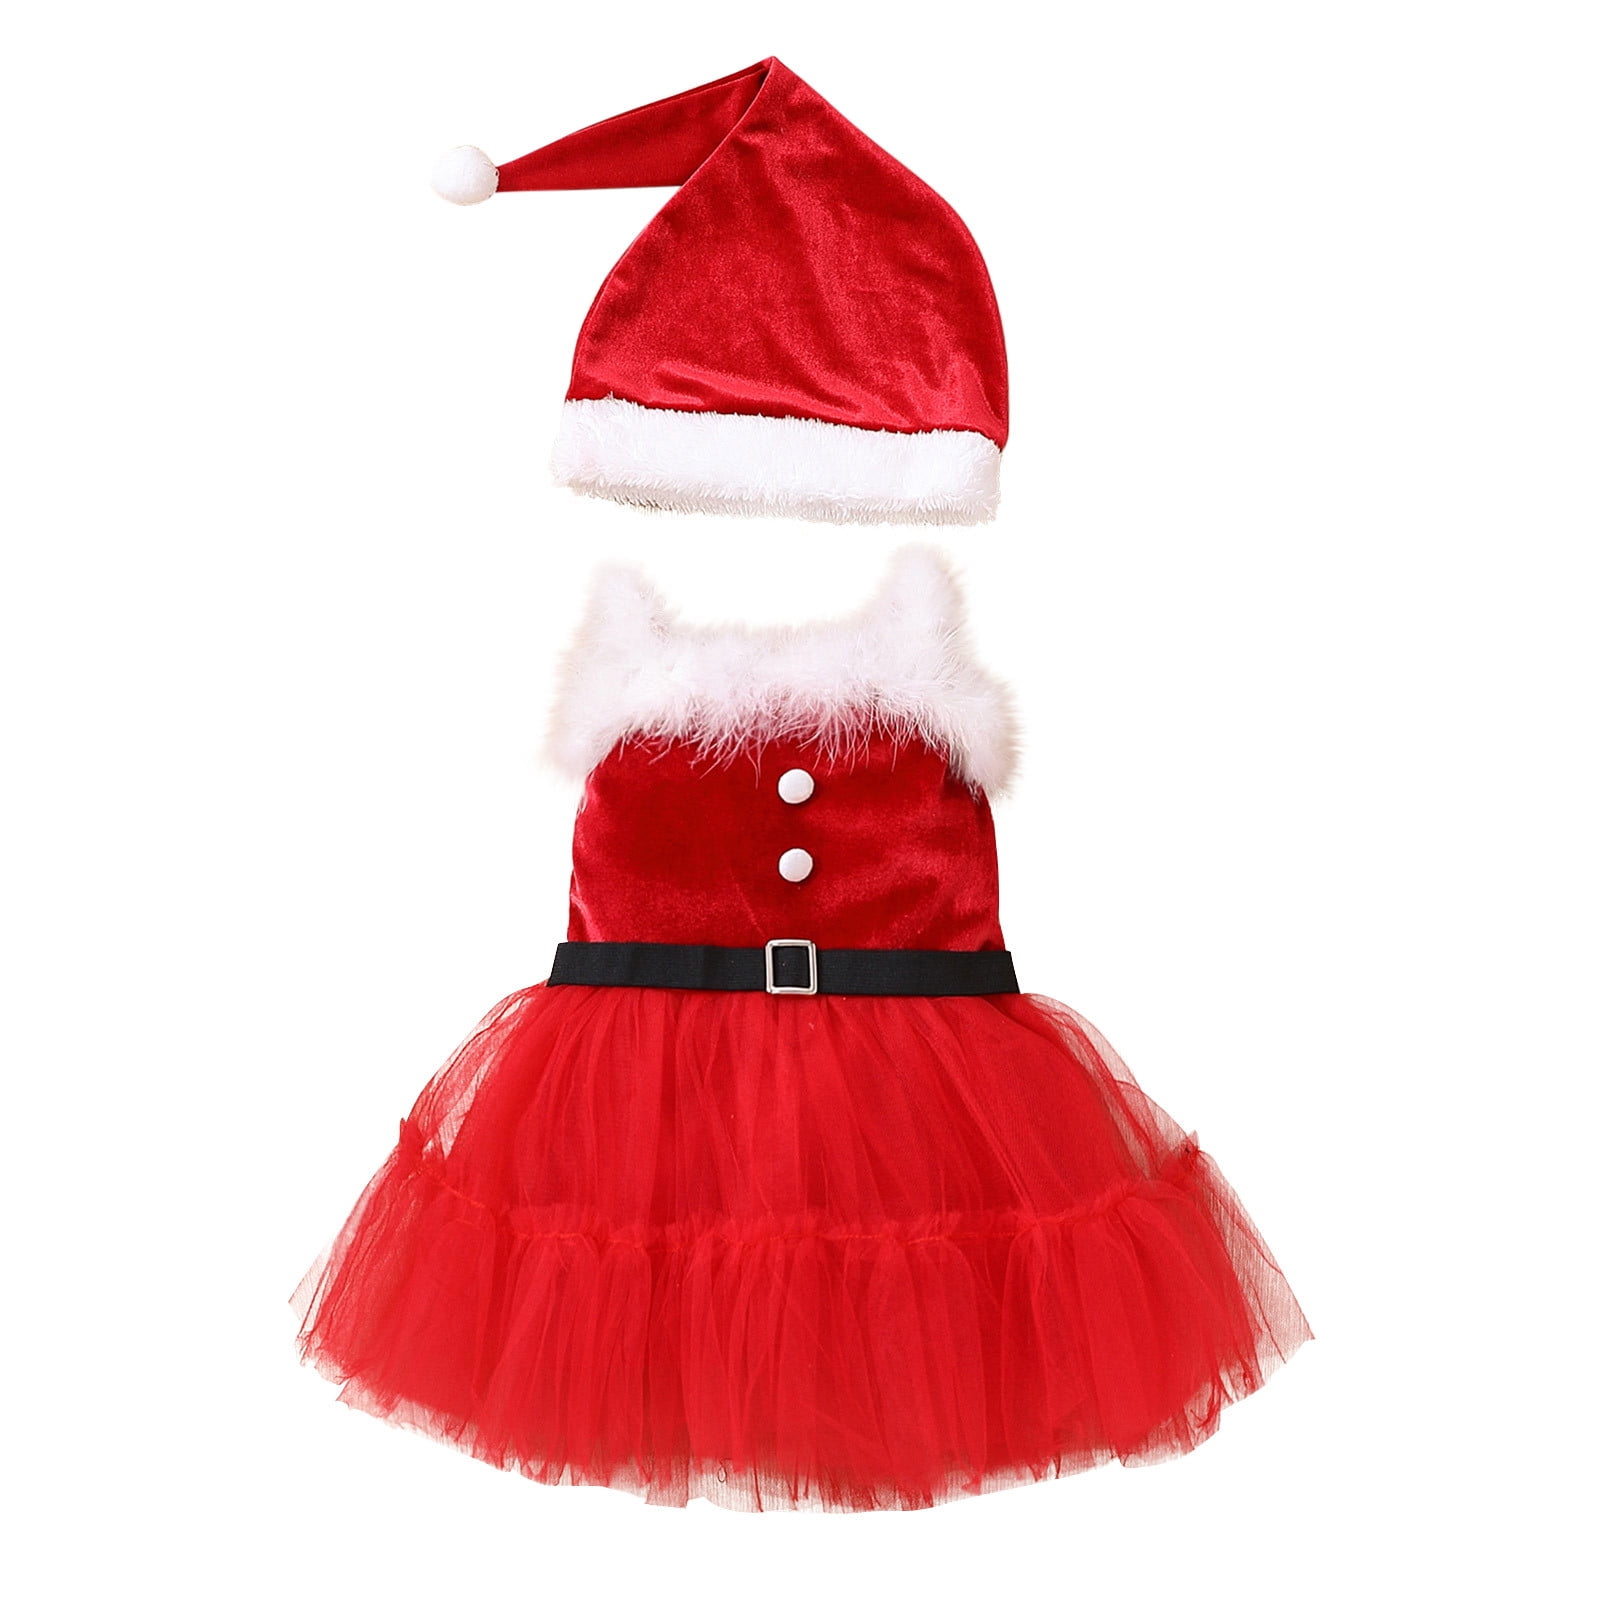 skpabo Winter Baby Christmas Cosplay Dress Newborn Costume Outfit Hat 2pcs  